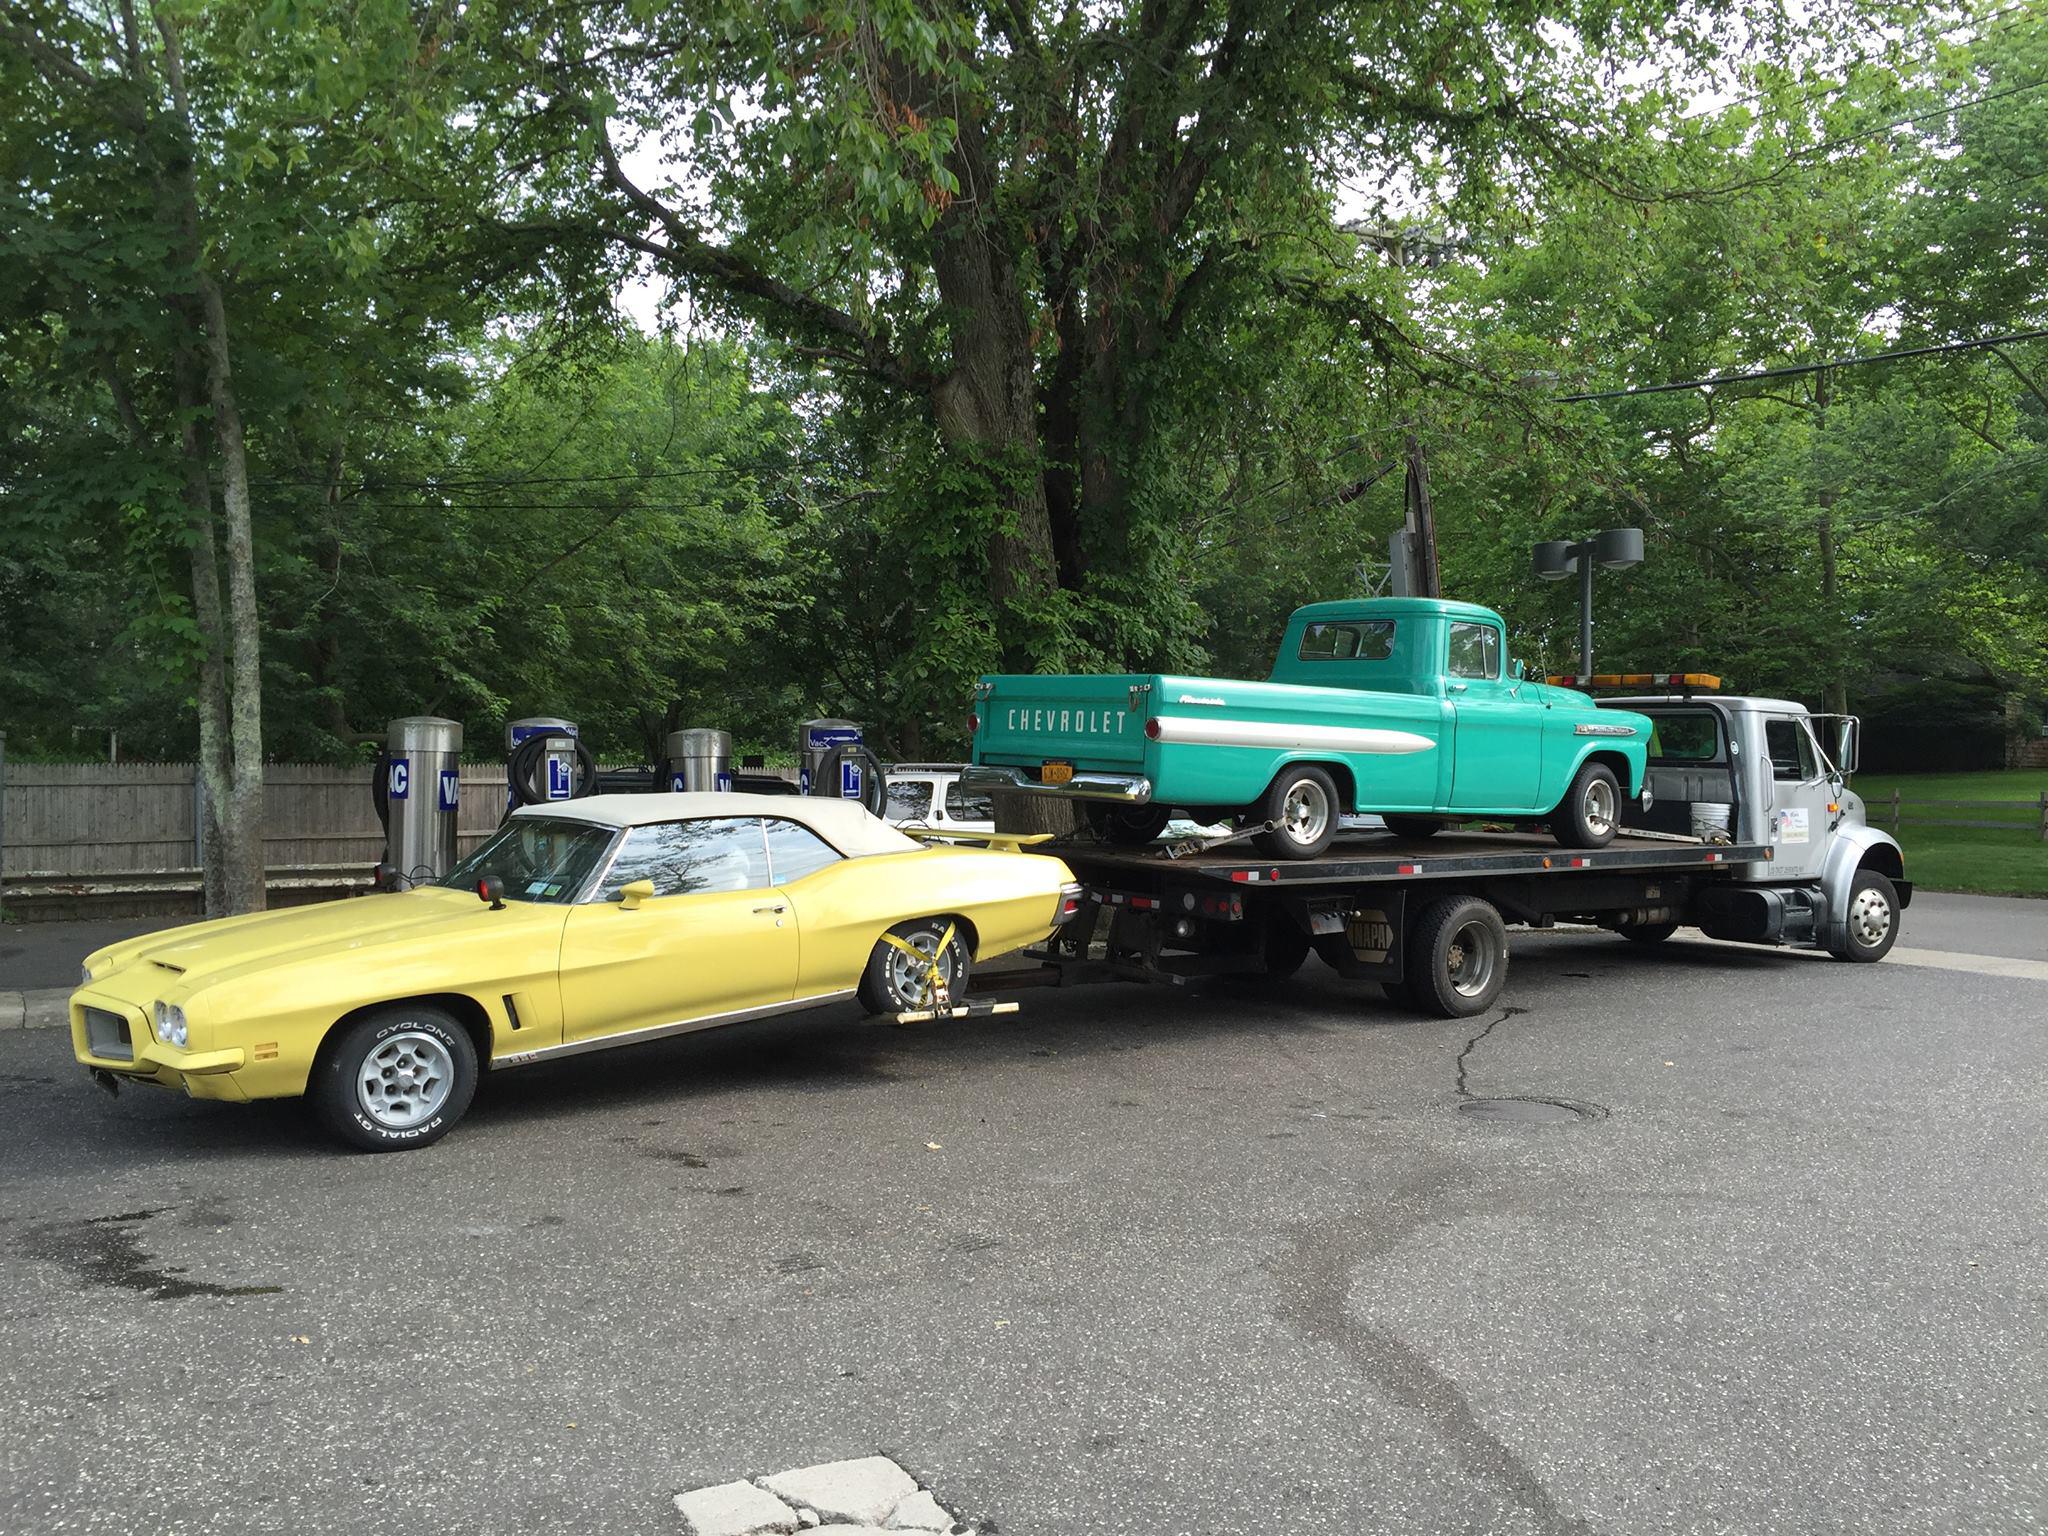 Rob's Towing & Transport Inc Photo